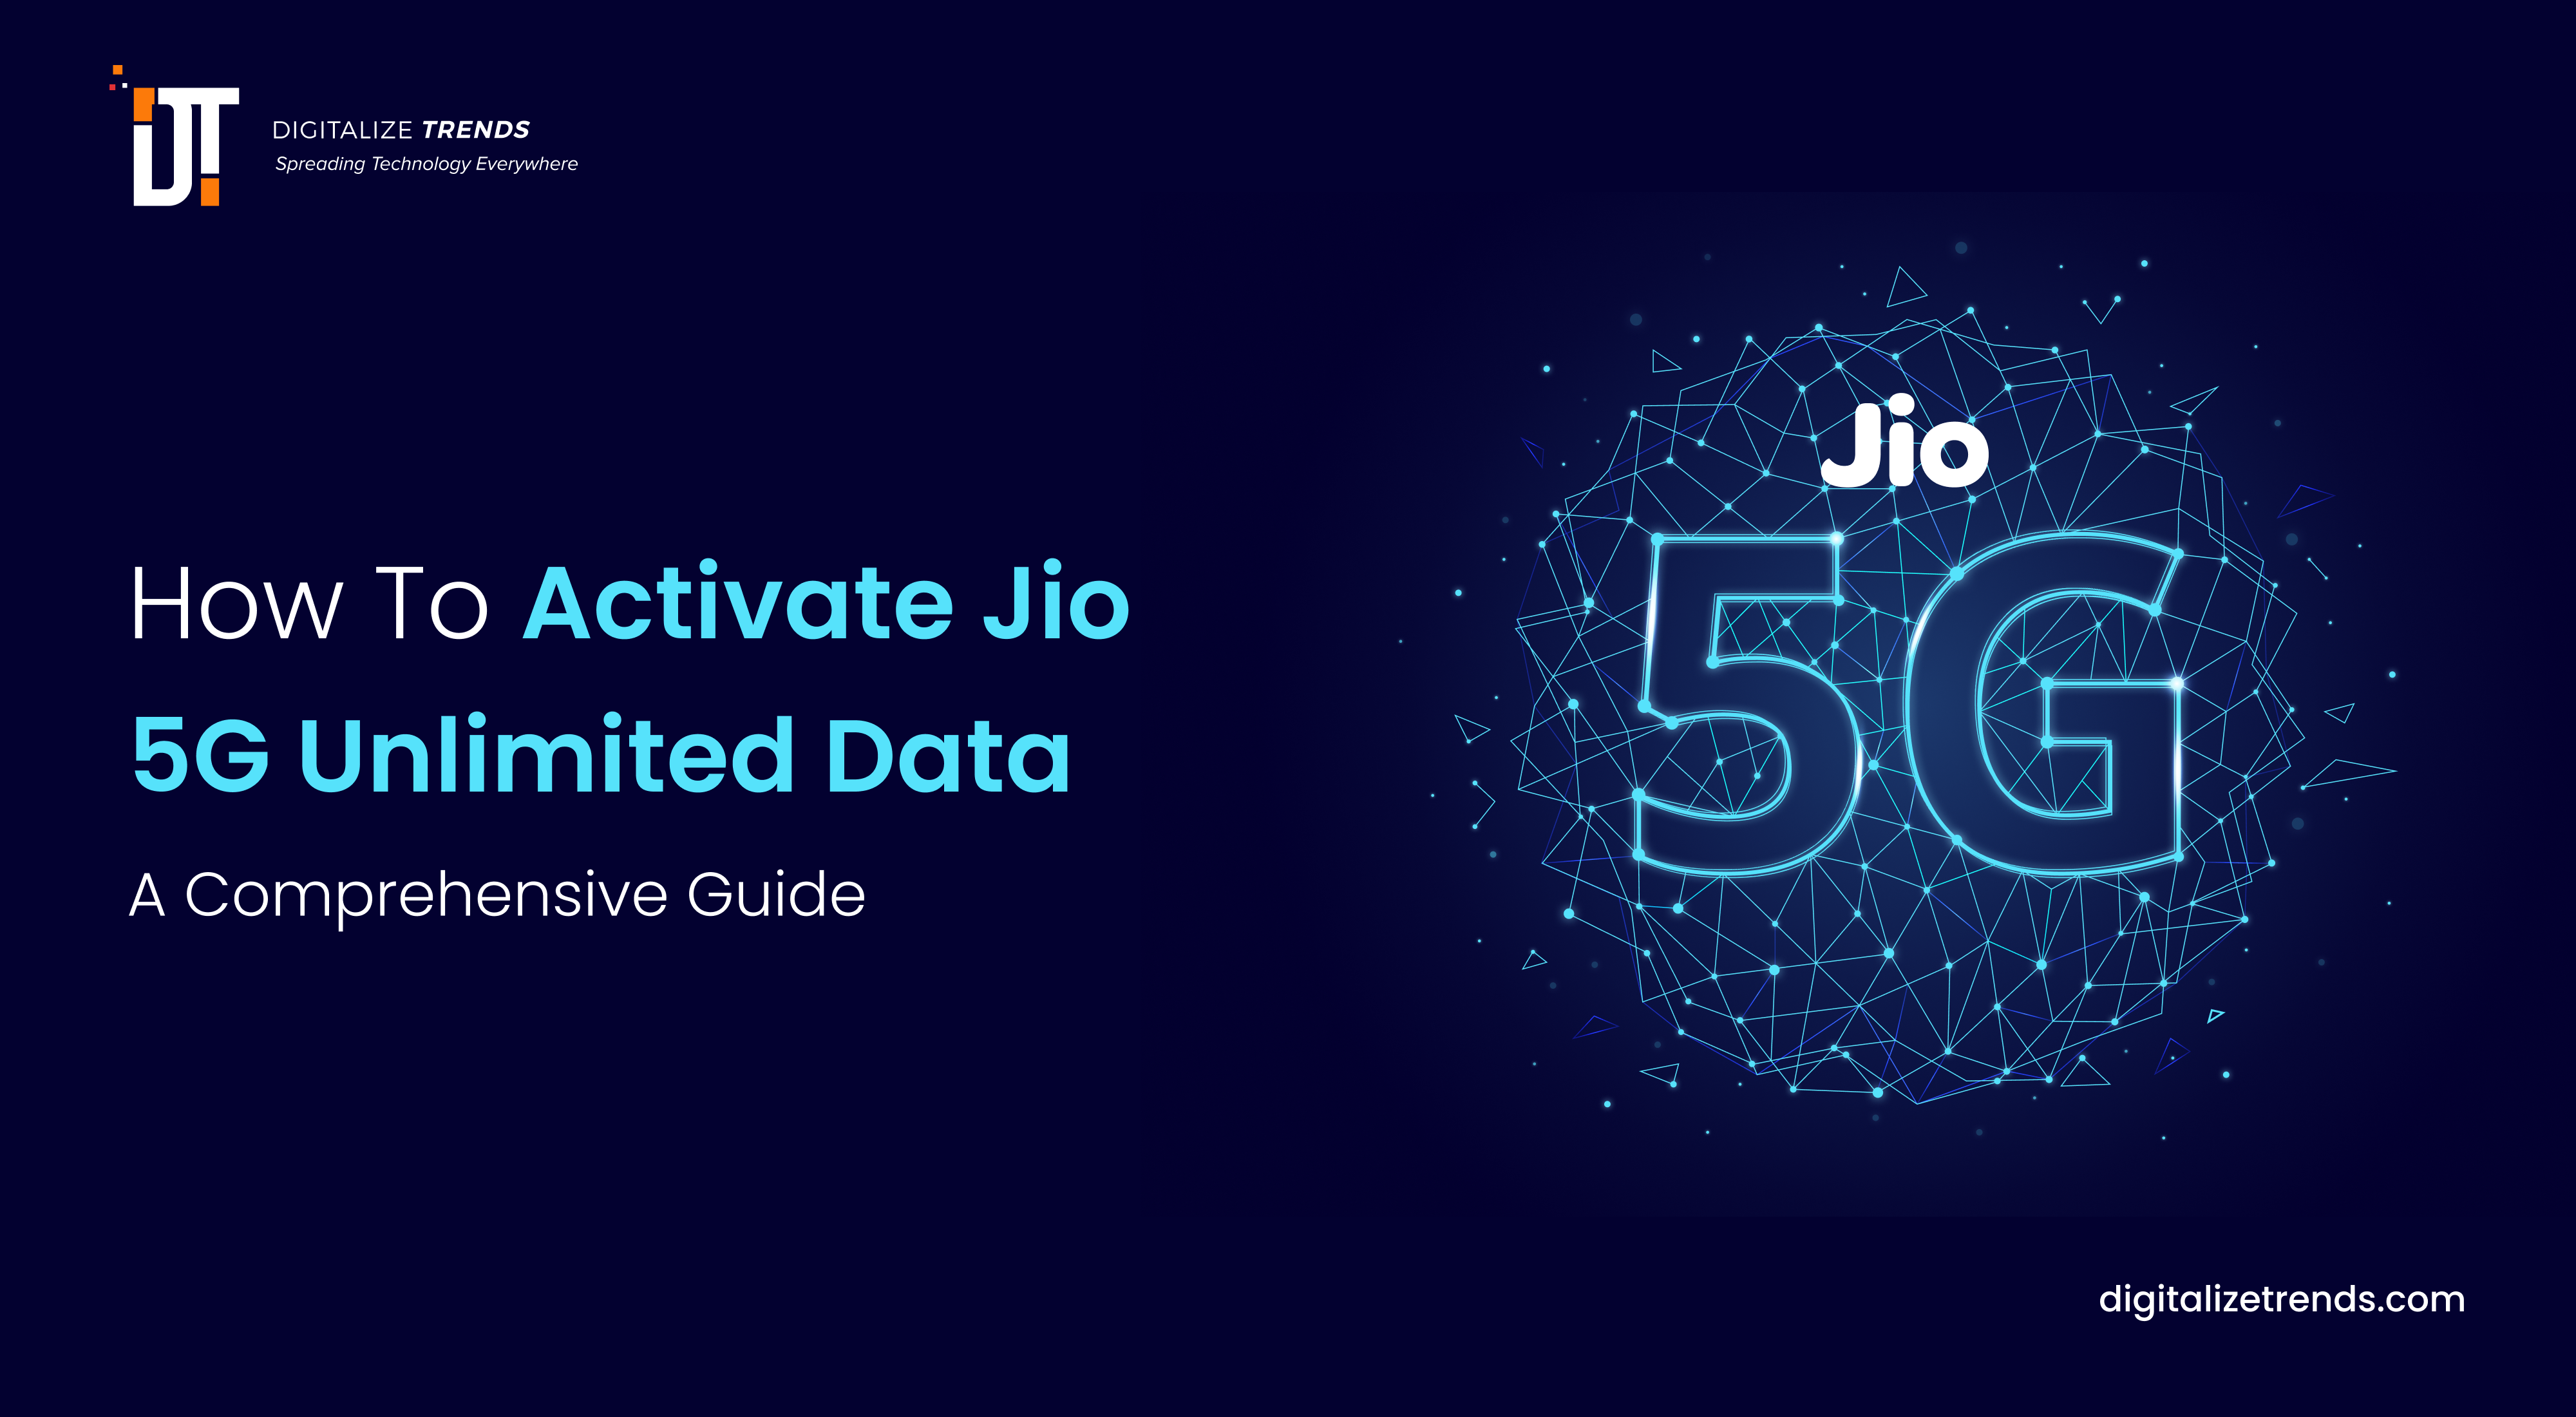 How To Activate Jio 5G Unlimited Data - A Comprehensive Guide